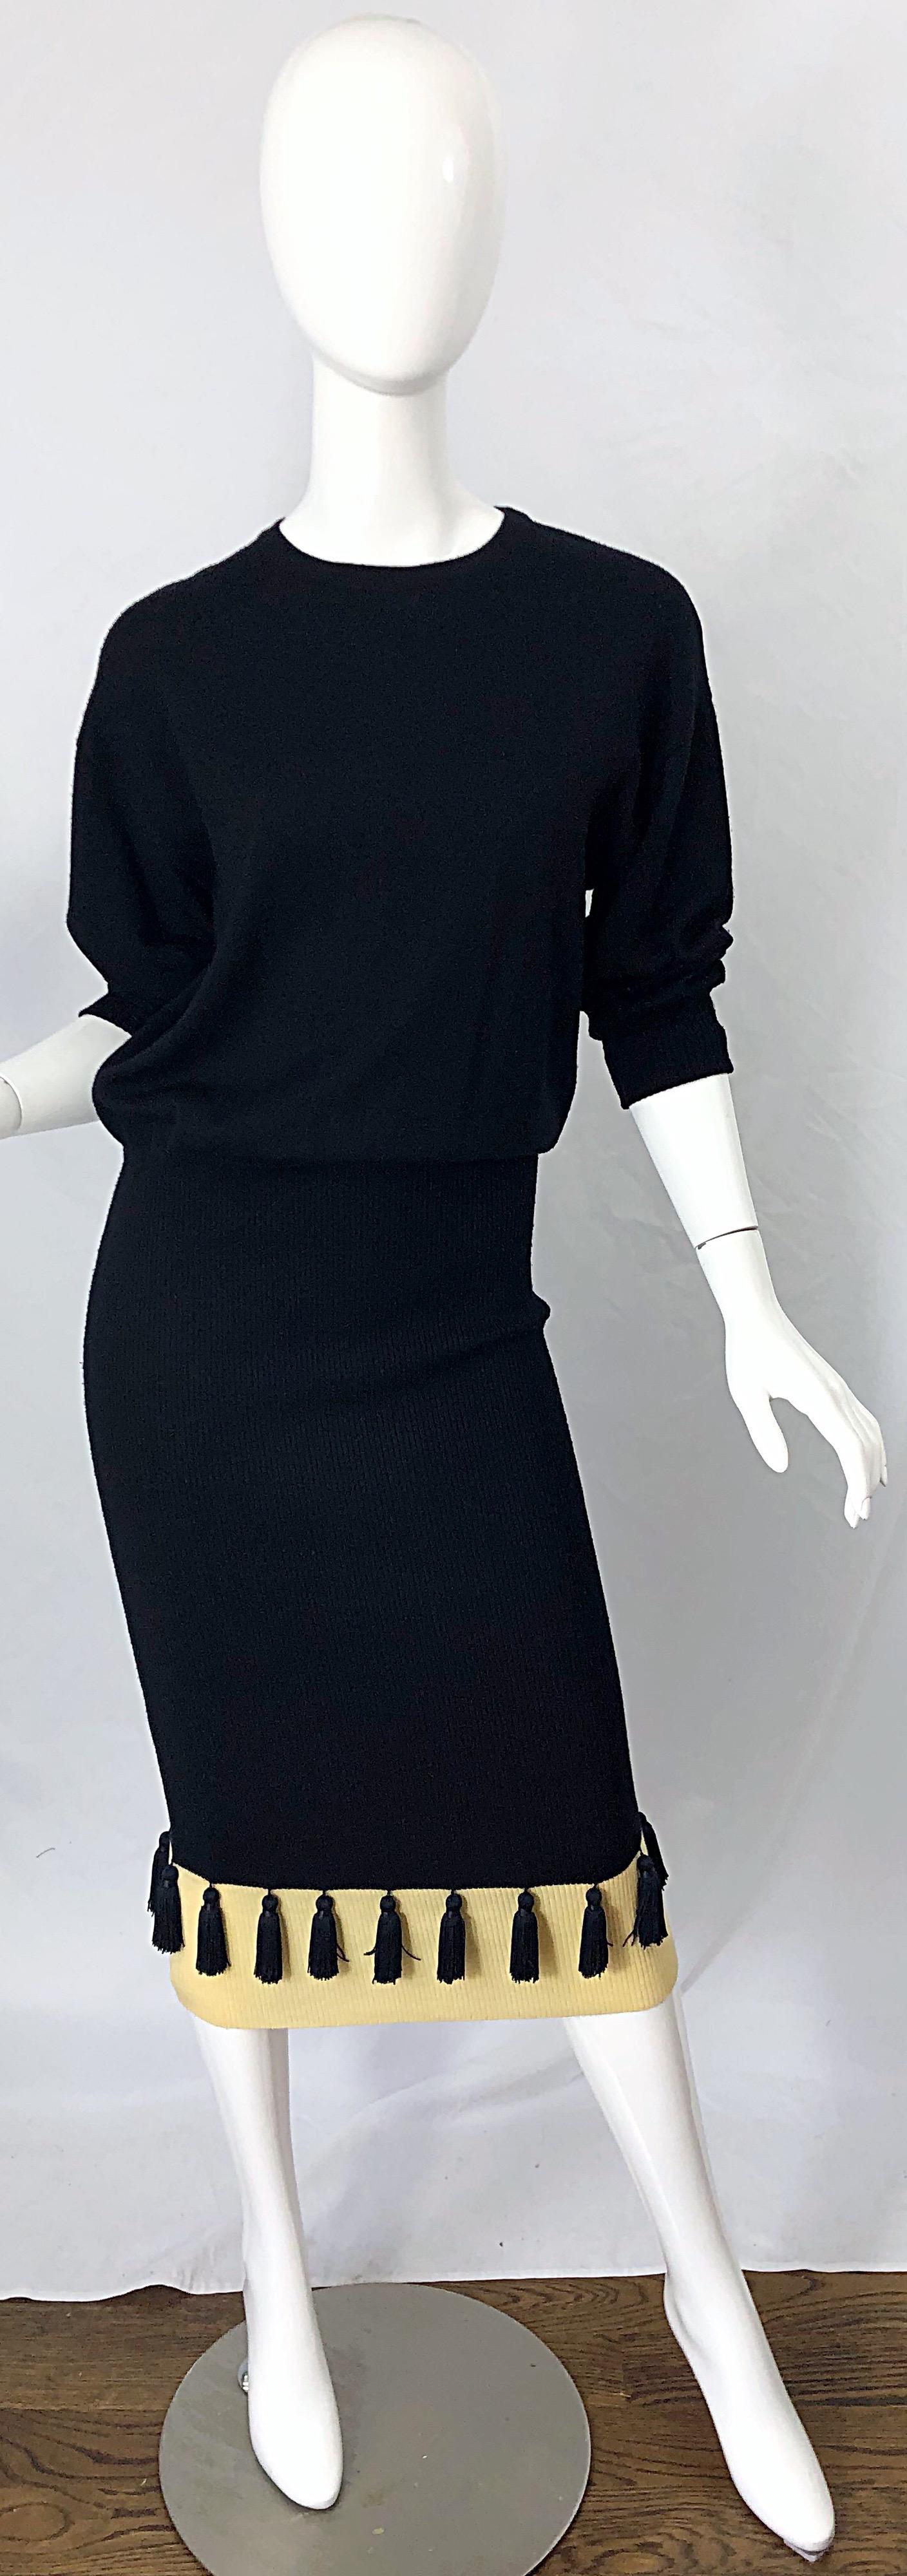 1980s Angelo Tarlazzi Black and Ivory Wool Dolman Sleeve 80s Sweater Dress For Sale 5